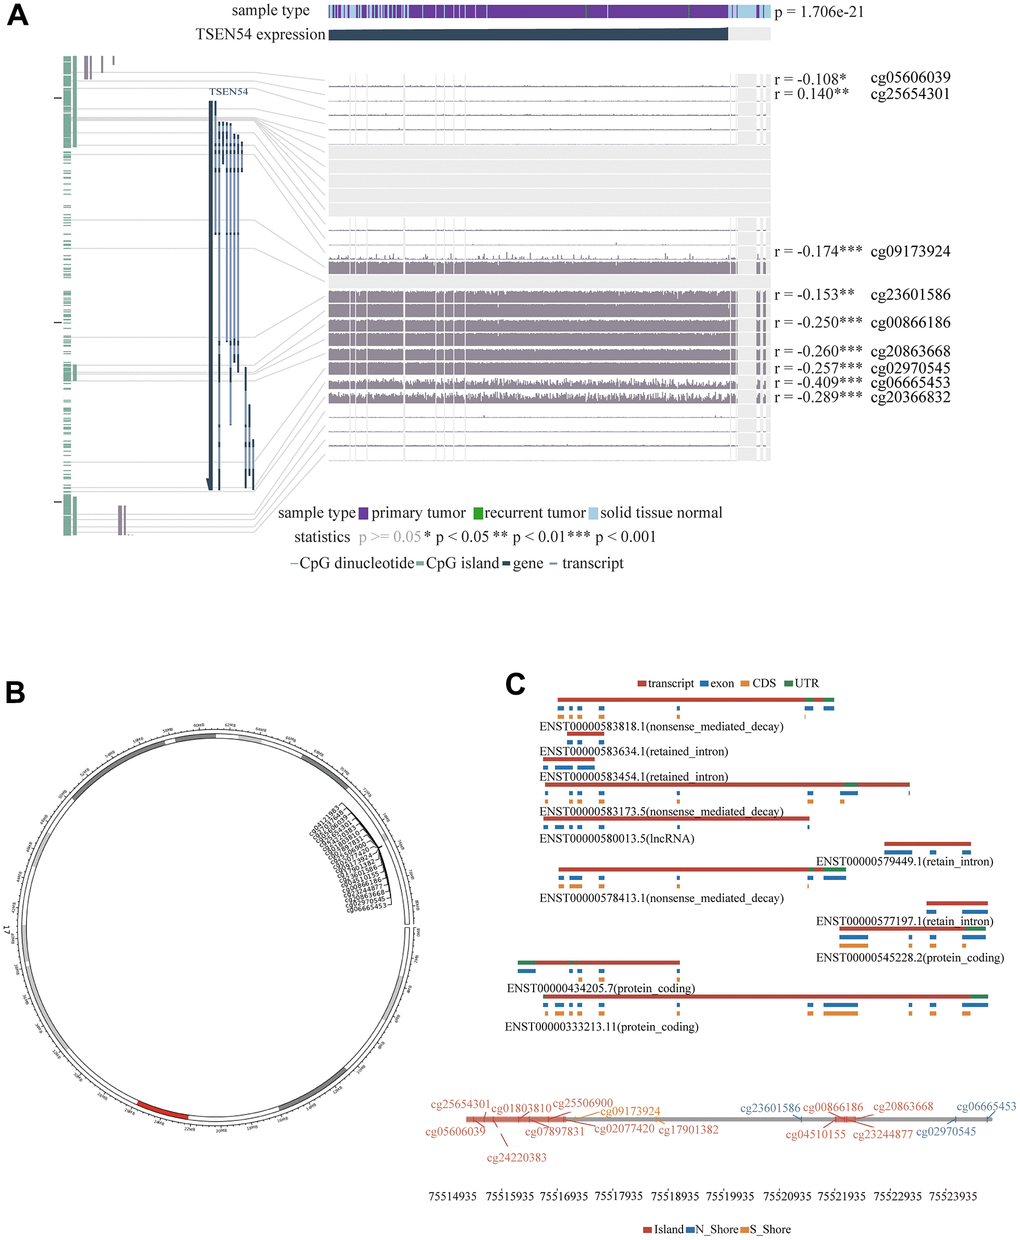 Distribution of CpG sites on TSEN54. (A) Correlation between TSEN54 expression and methylation of the CpG sites. (B) Distribution of TSEN54 methylation probes on chromosome. (C) Location of CpG sites associated with TSEN54.